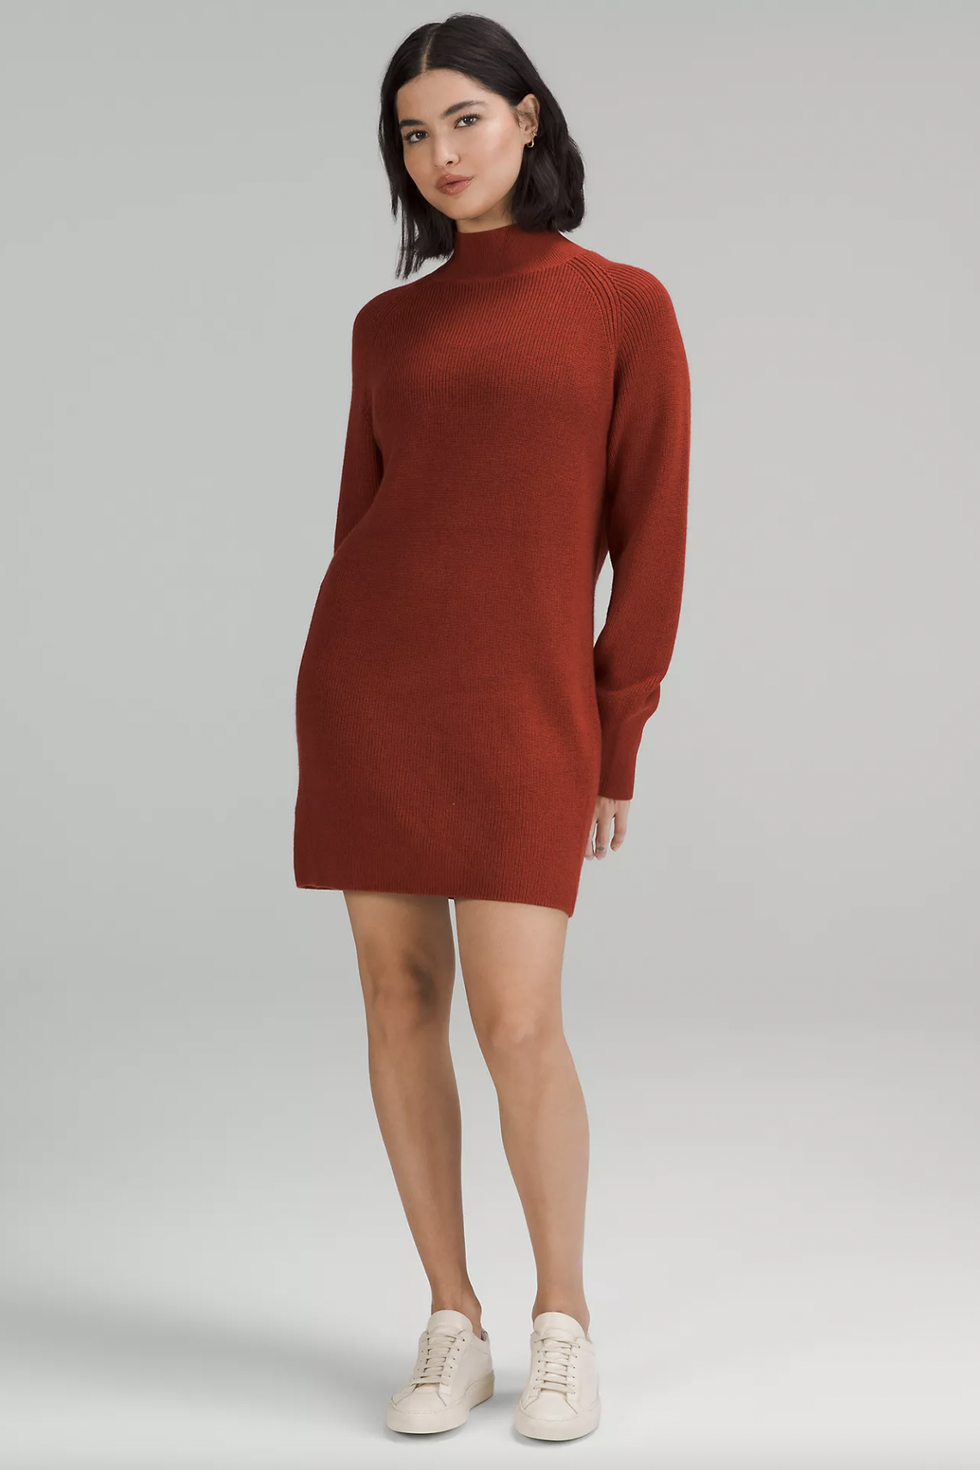 The 15 Most Stylish Sweater Dresses For Women 2023